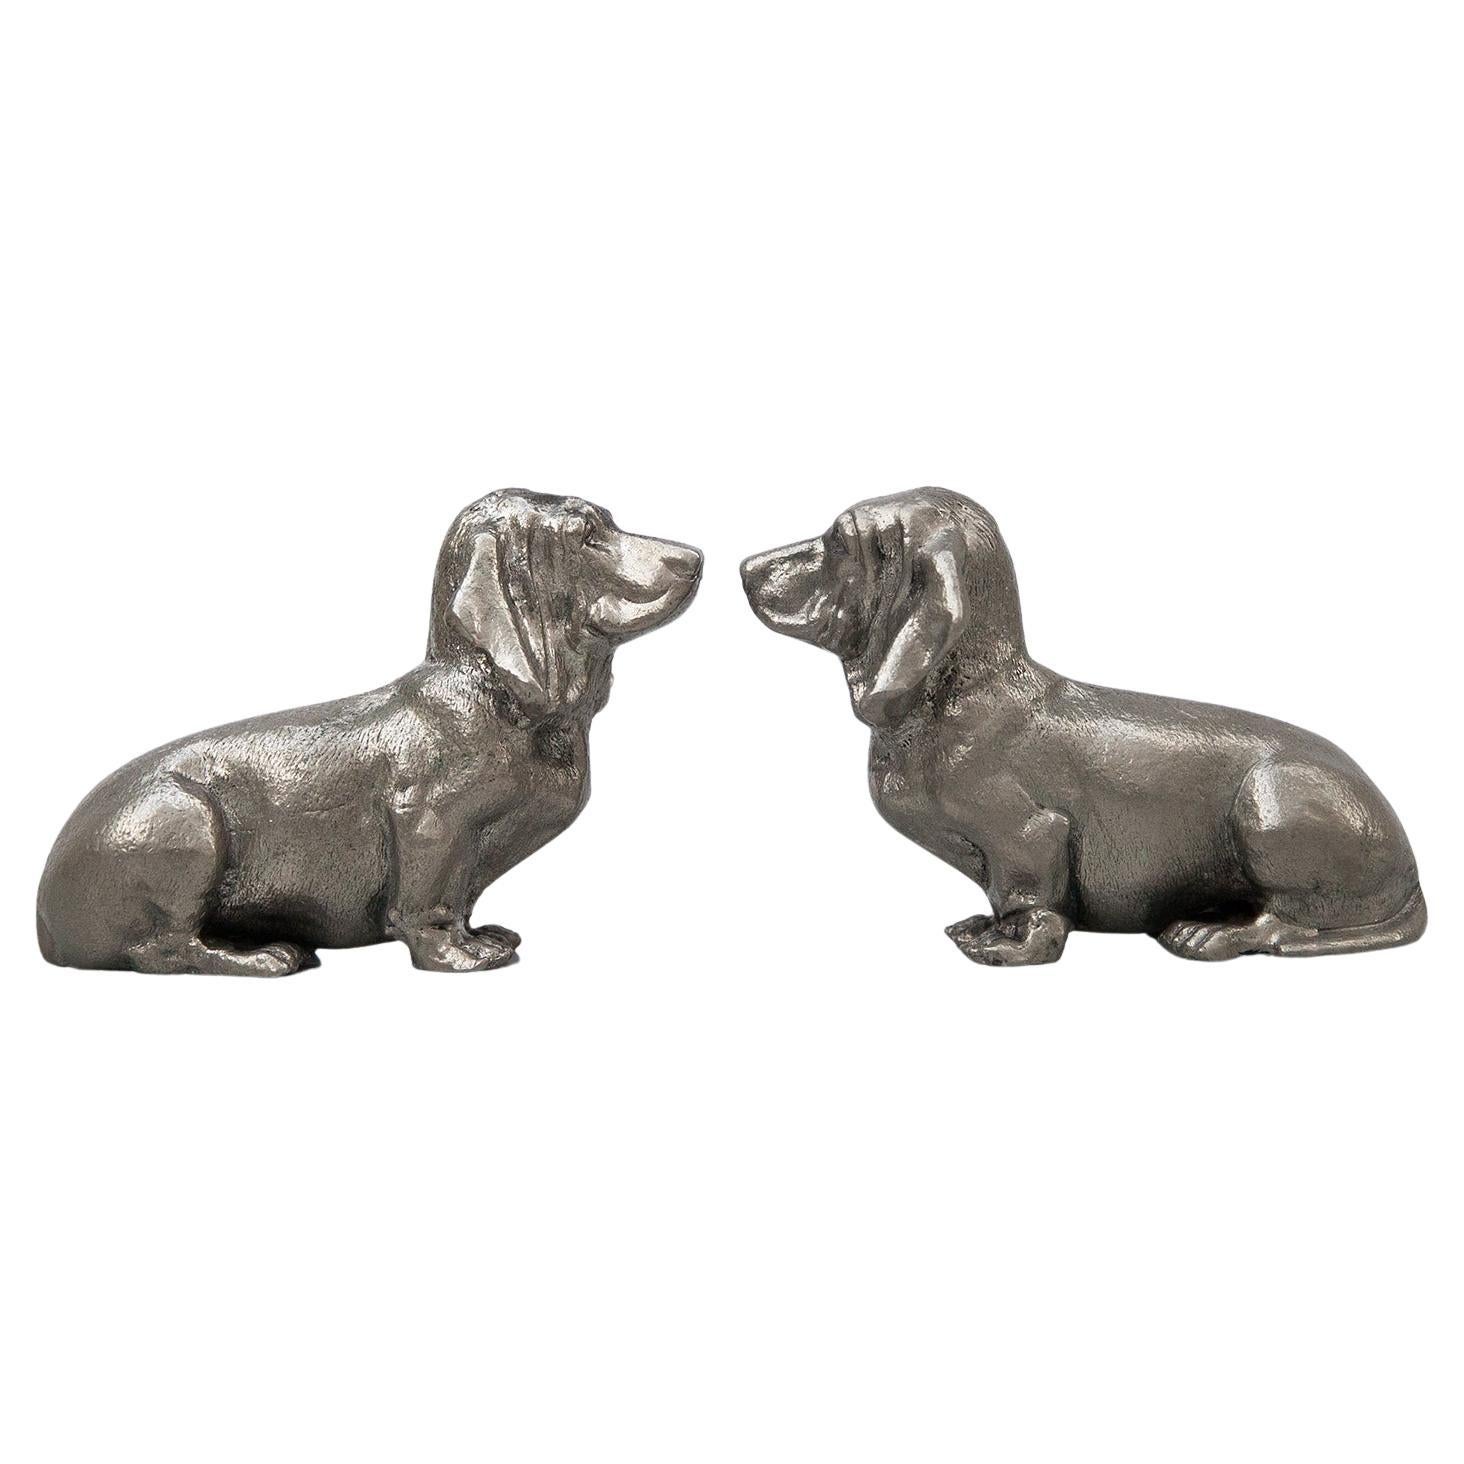 Gucci Vintage Silver Plated Basset, 1960s